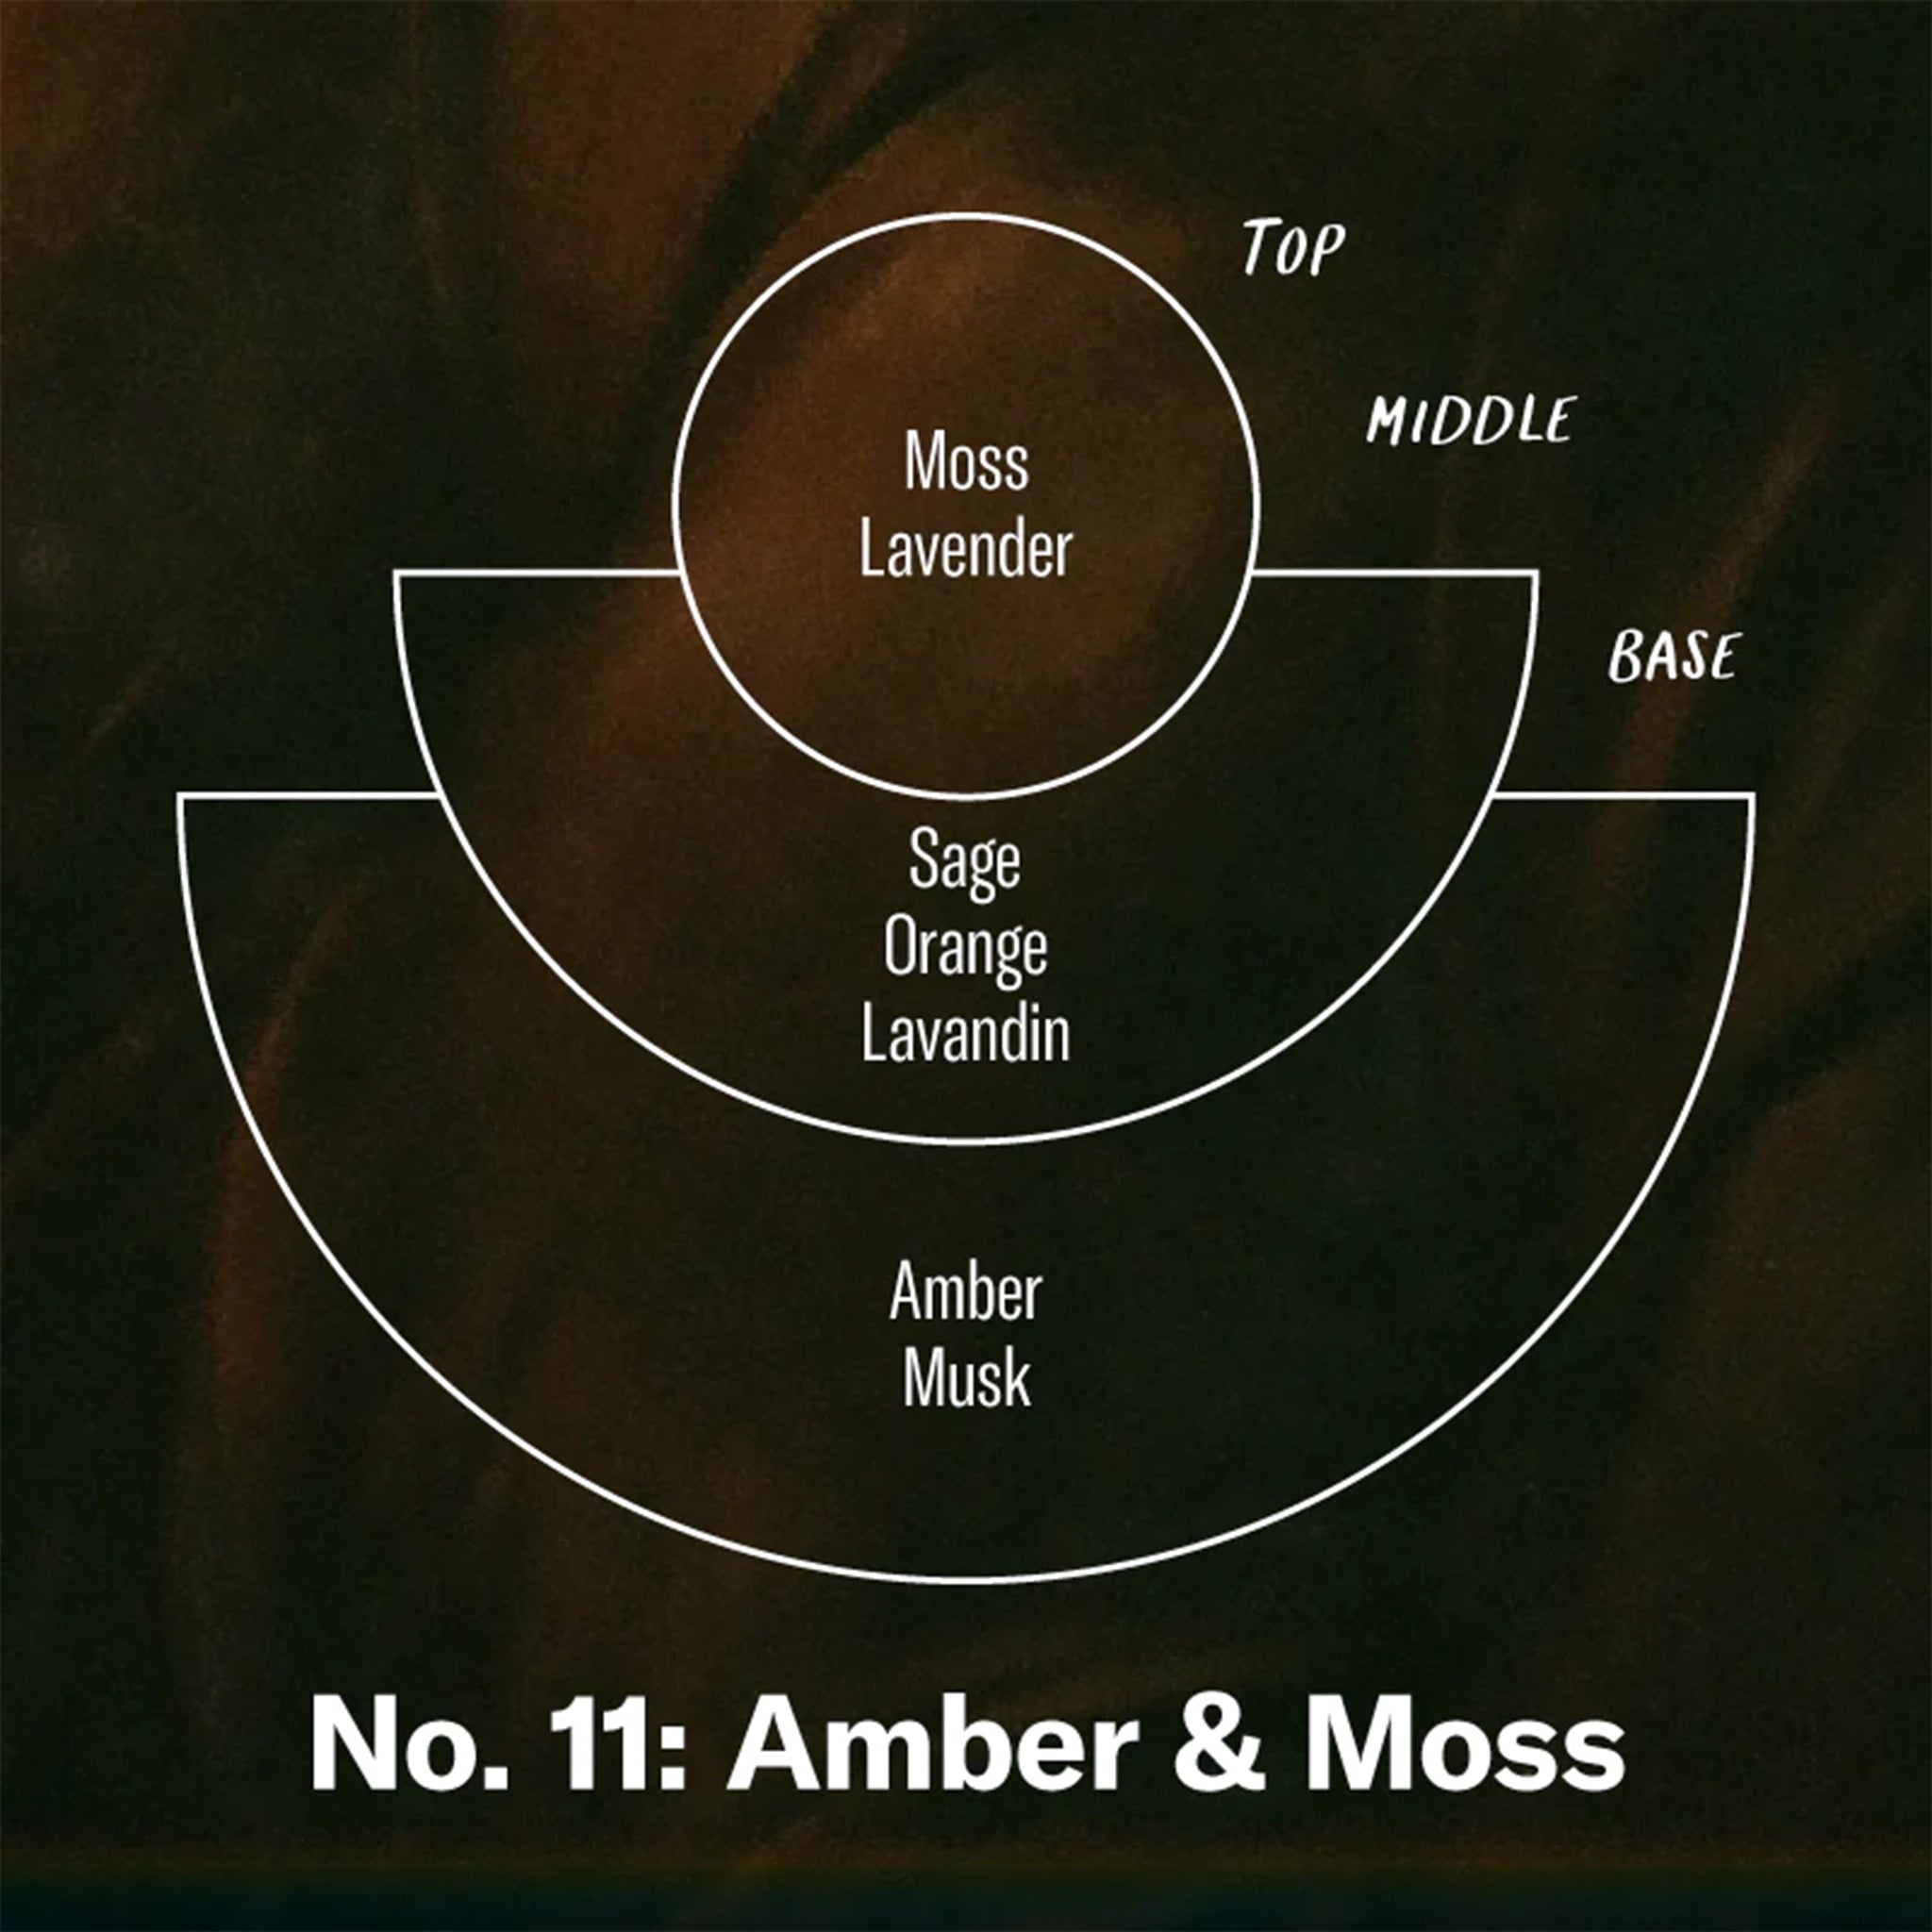 A layered diagram explaining the notes  started with Moss Lavender as the top note, Sage, Orange and Lavander as the middle notes and Amber Musk as the base.